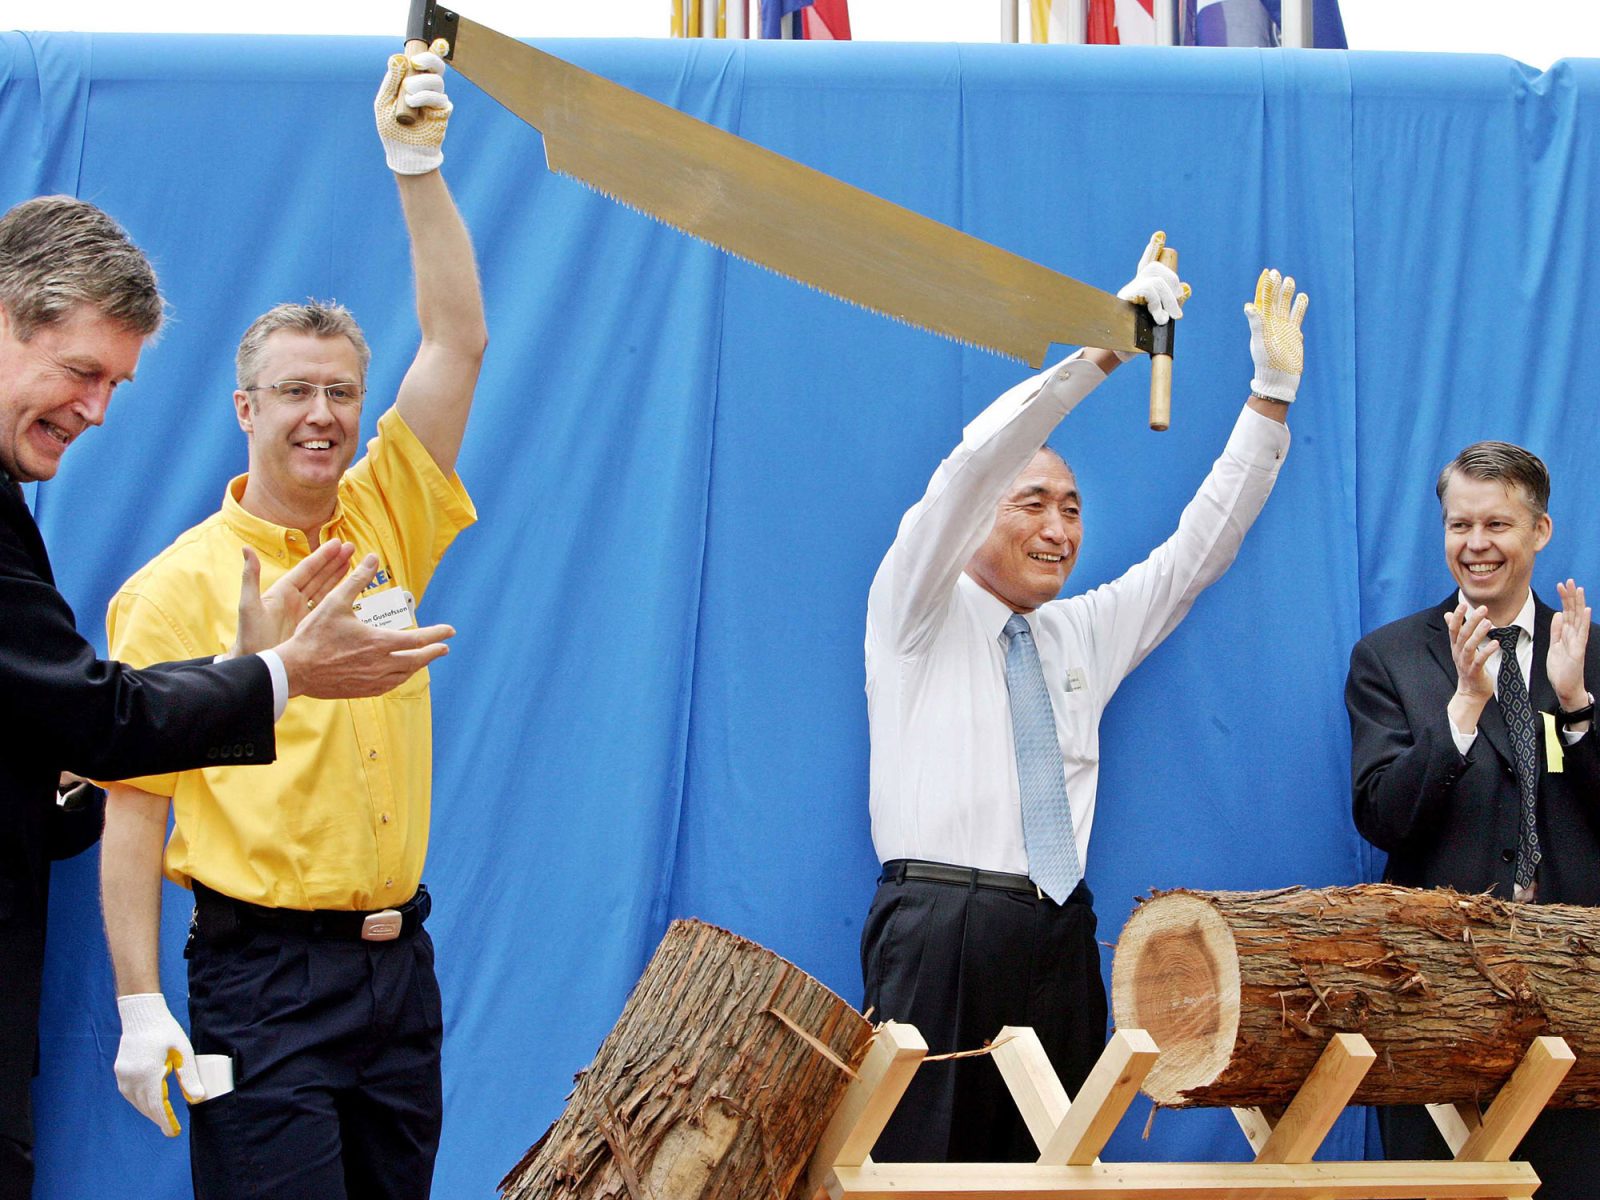 Two happy men proudly lifting a large saw, in front of them lies a large log split in two.